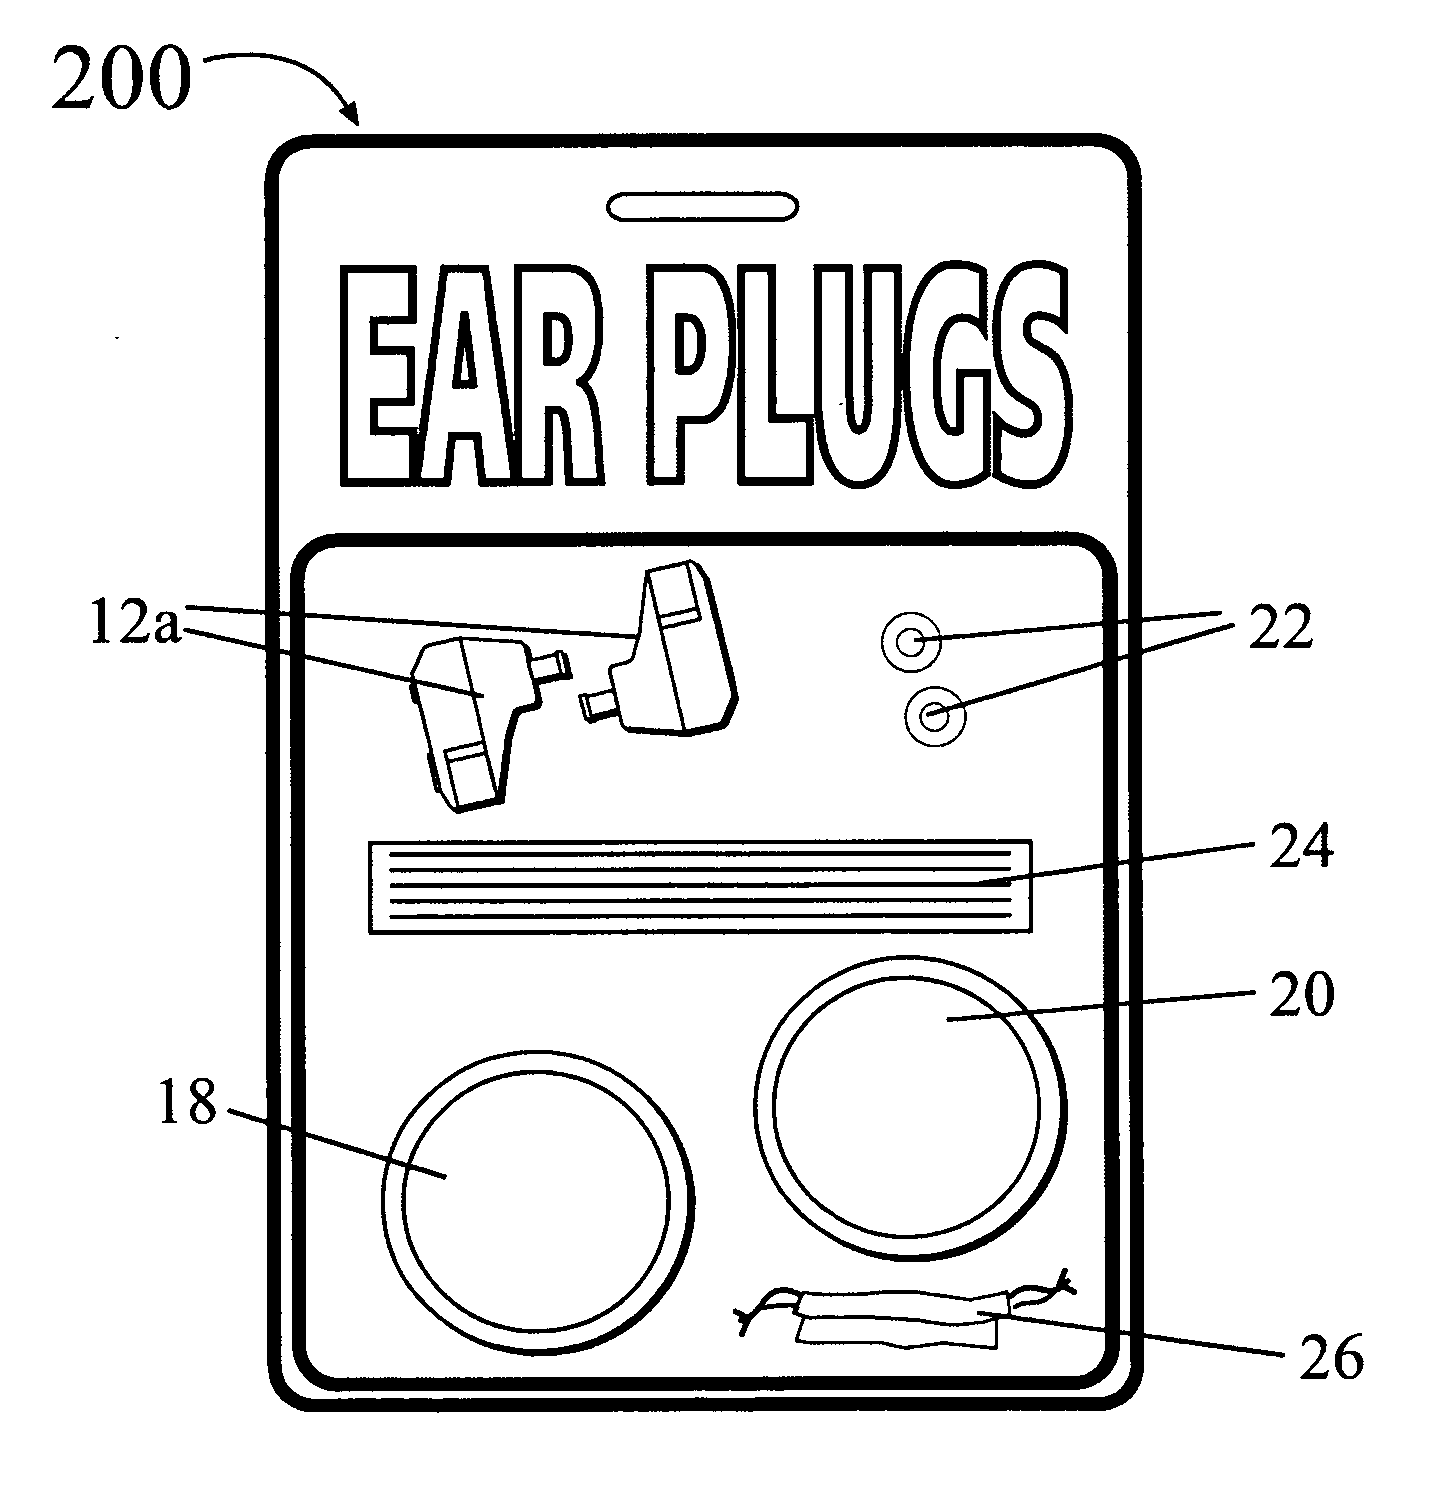 Custom-fit hearing device kit and method of use